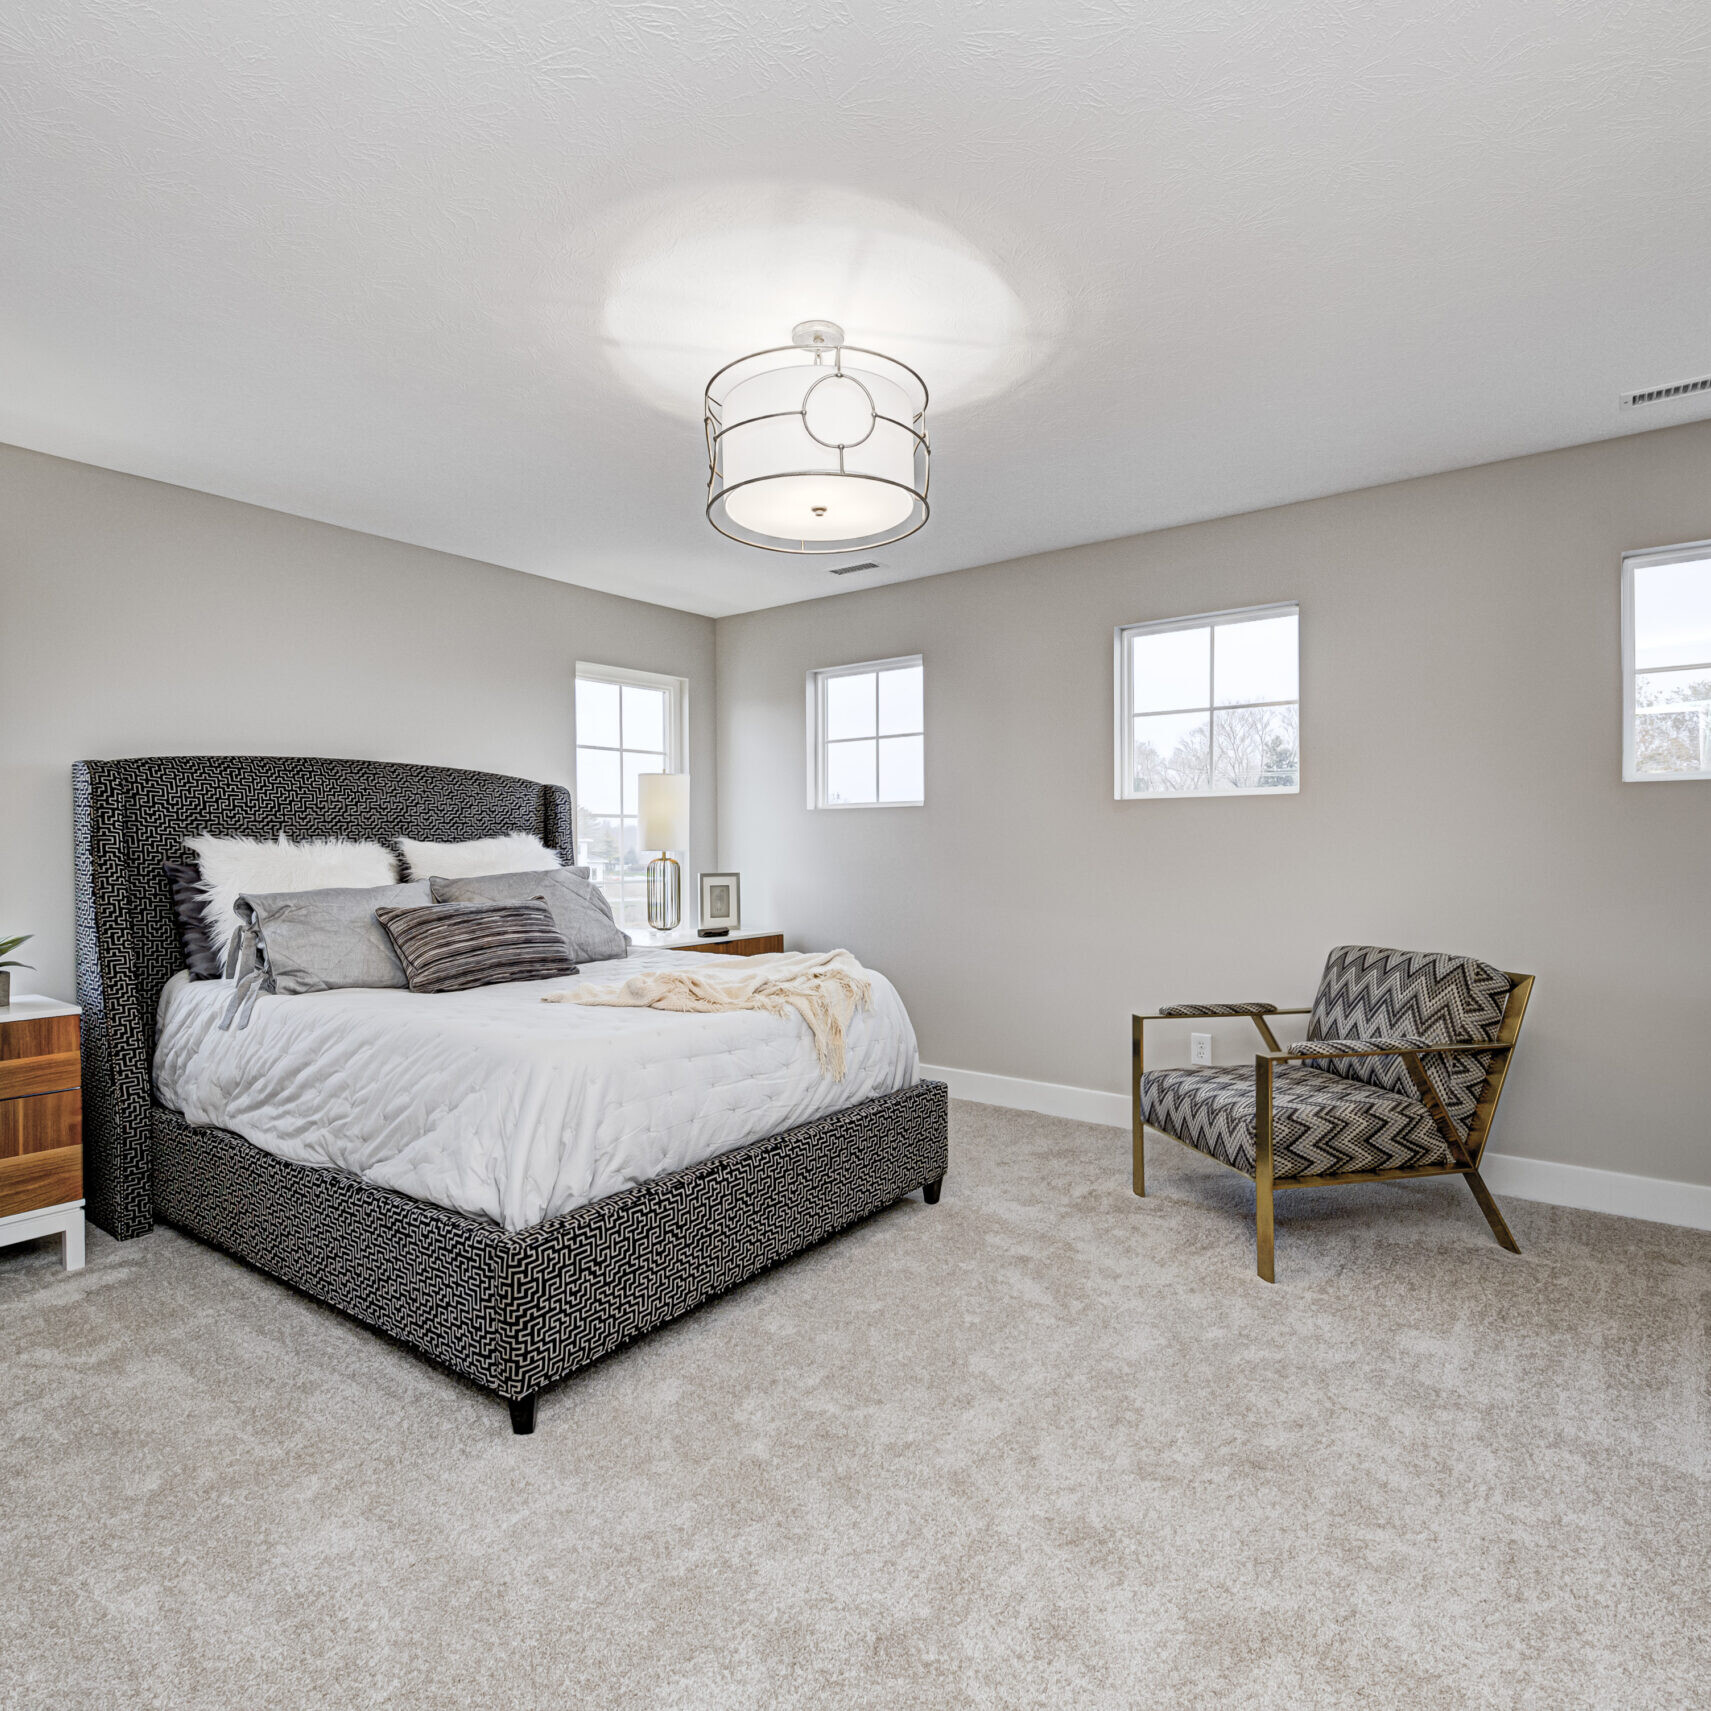 A bedroom with a bed, dresser and chair in a custom home built by Indianapolis Custom Homes.